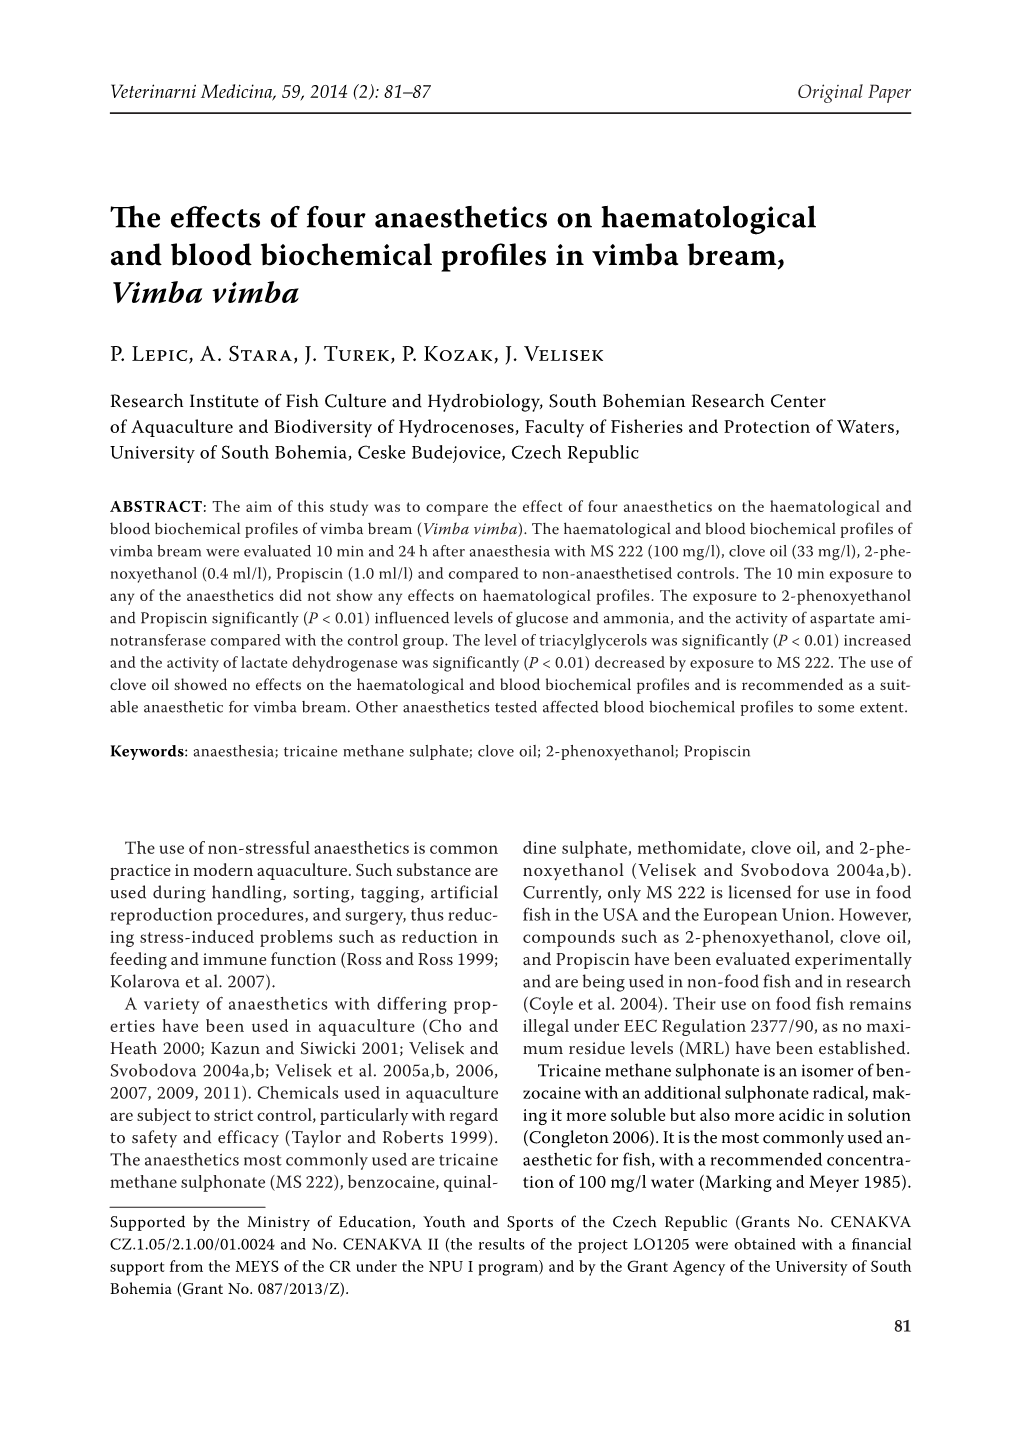 The Effects of Four Anaesthetics on Haematological and Blood Biochemical Profiles in Vimba Bream, Vimba Vimba